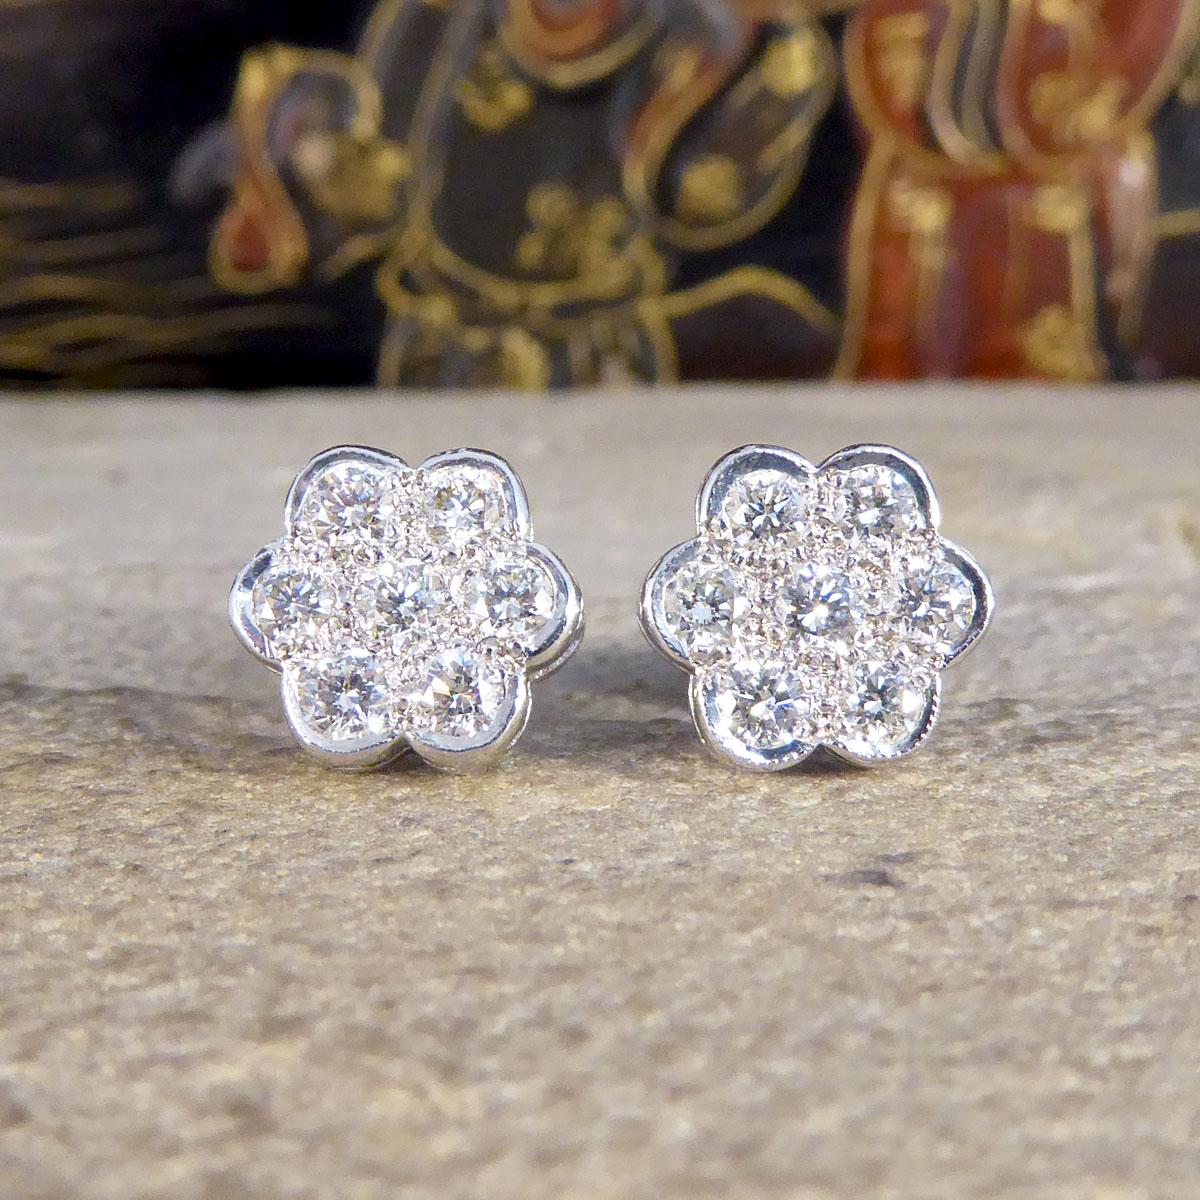 A lovely piece that will stand the test of time, these beautiful Diamond cluster earrings resemble a Daisy floral shape with a Diamond in the centre surrounded by 6 equally sized Diamonds. Together both earrings hold a total of 1.05ct Diamonds